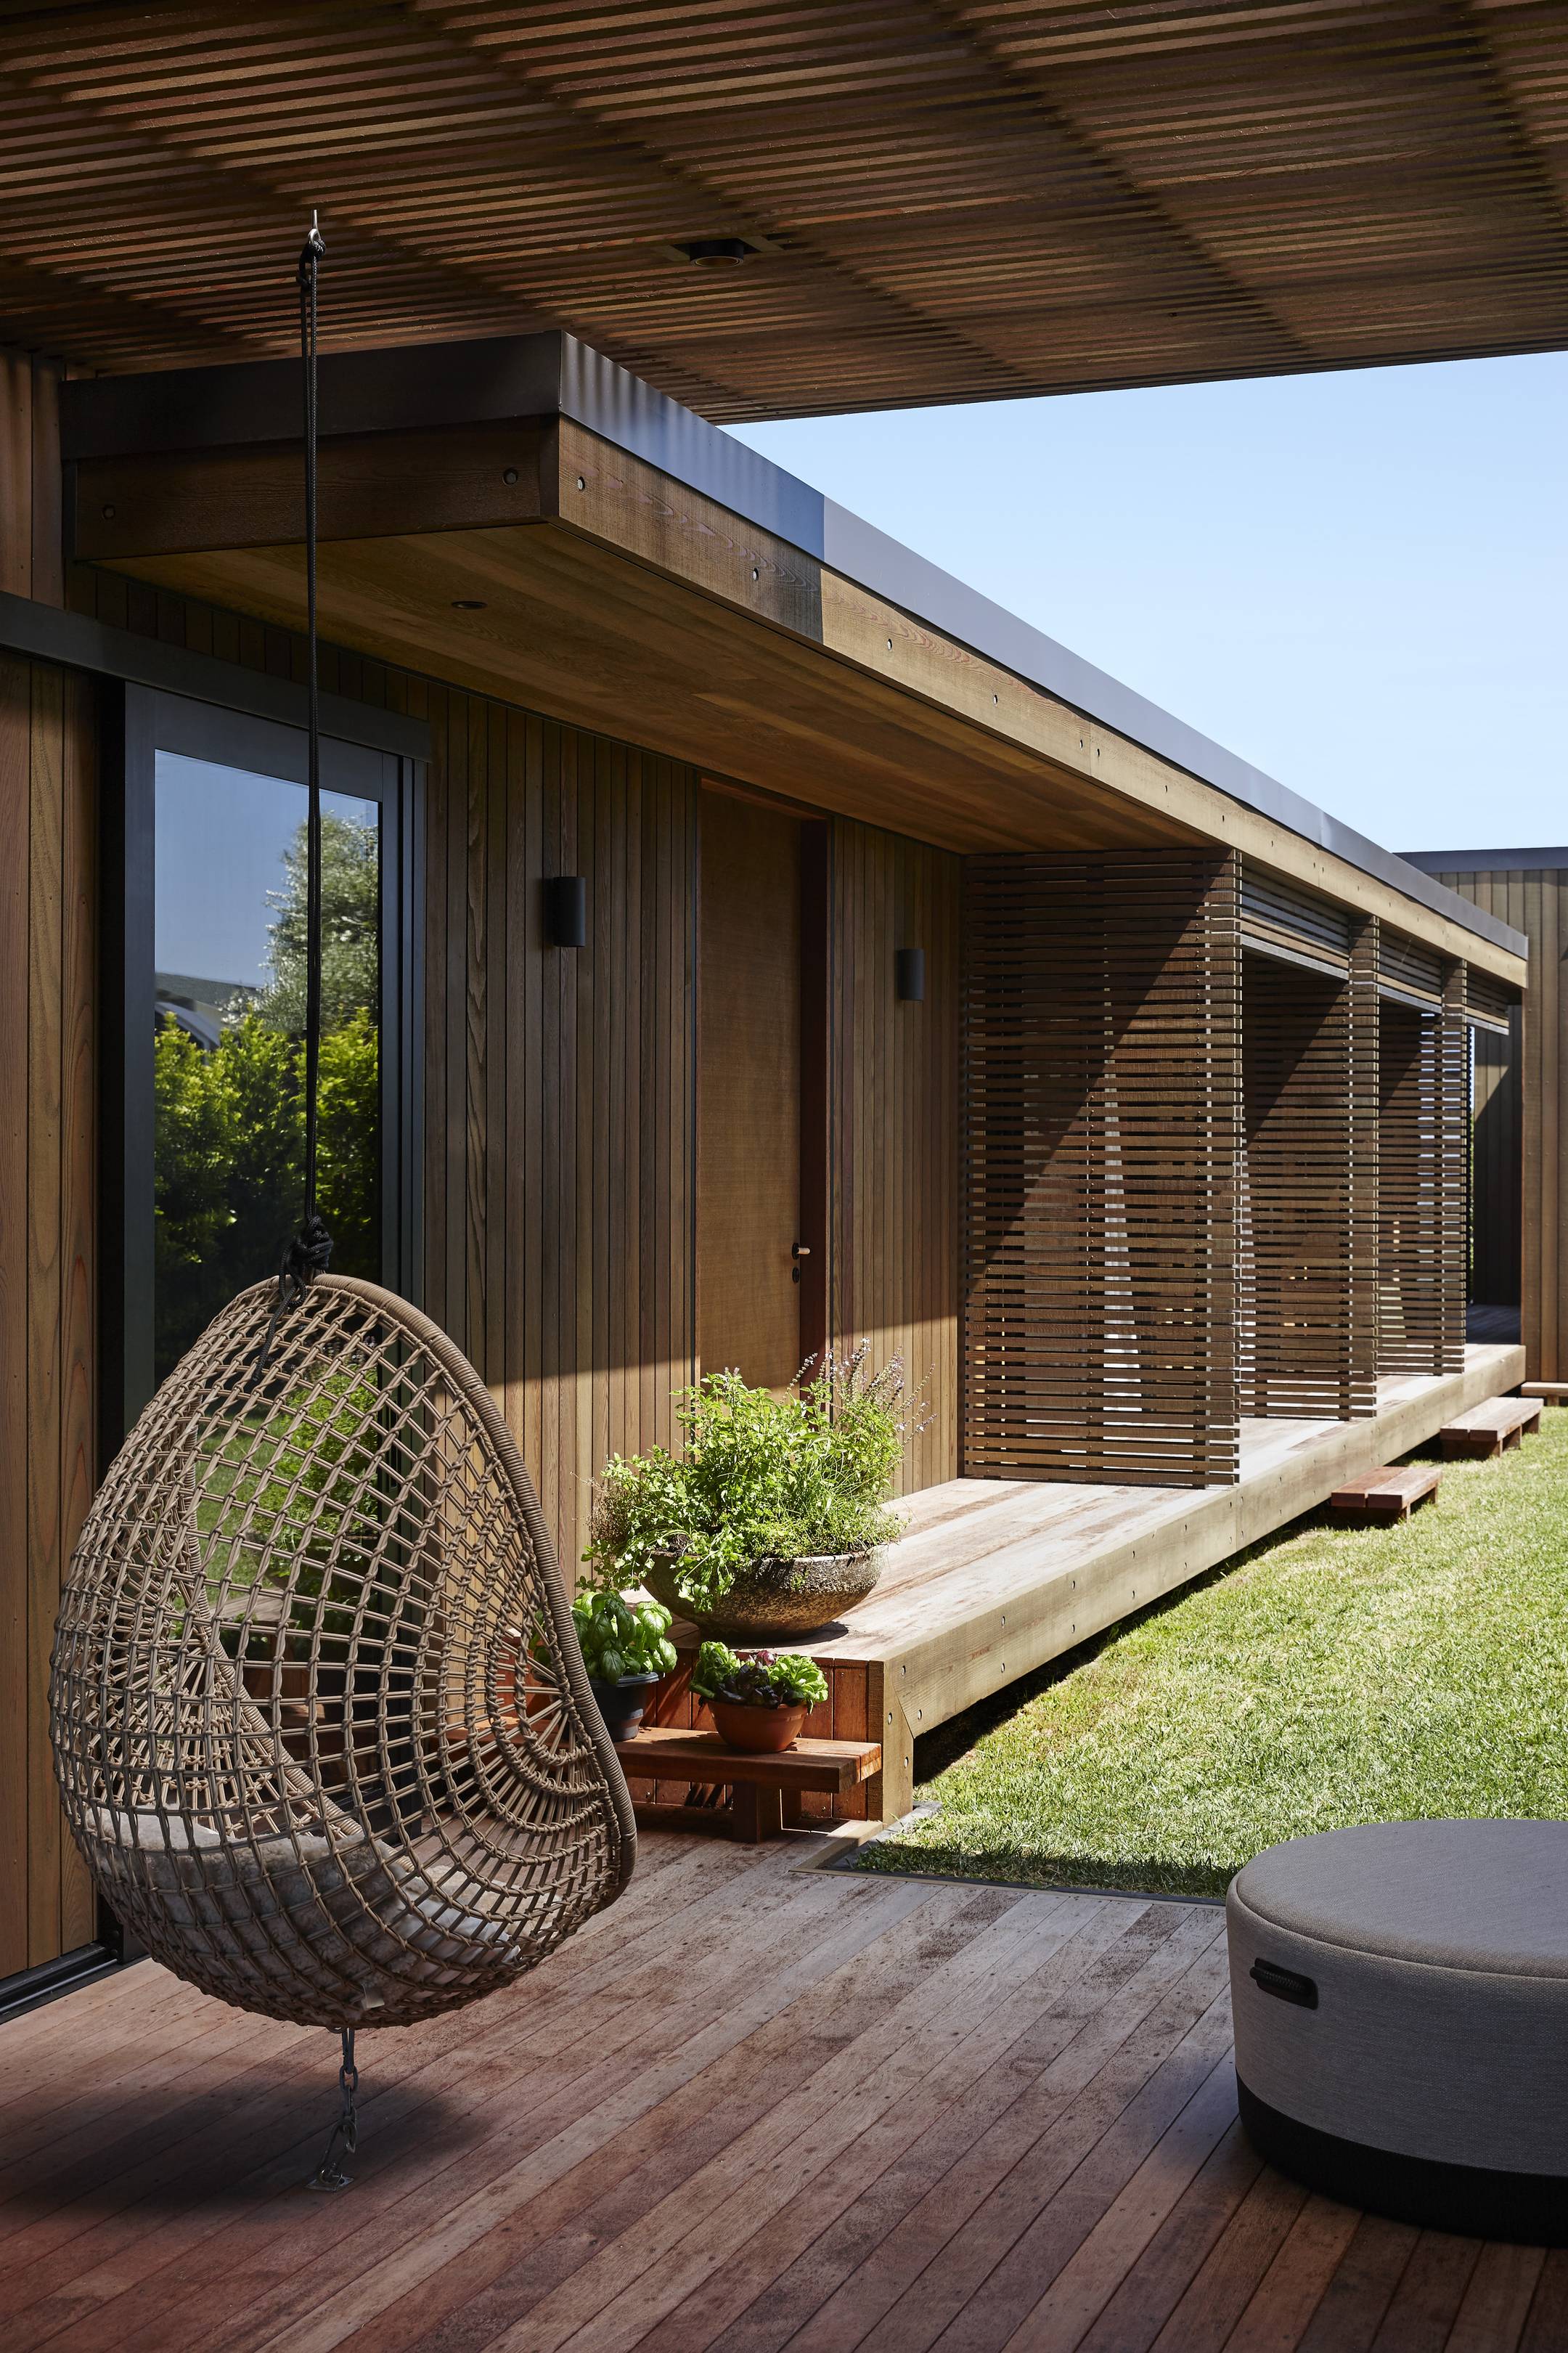 Papamoa Beach House by Herbst Architects